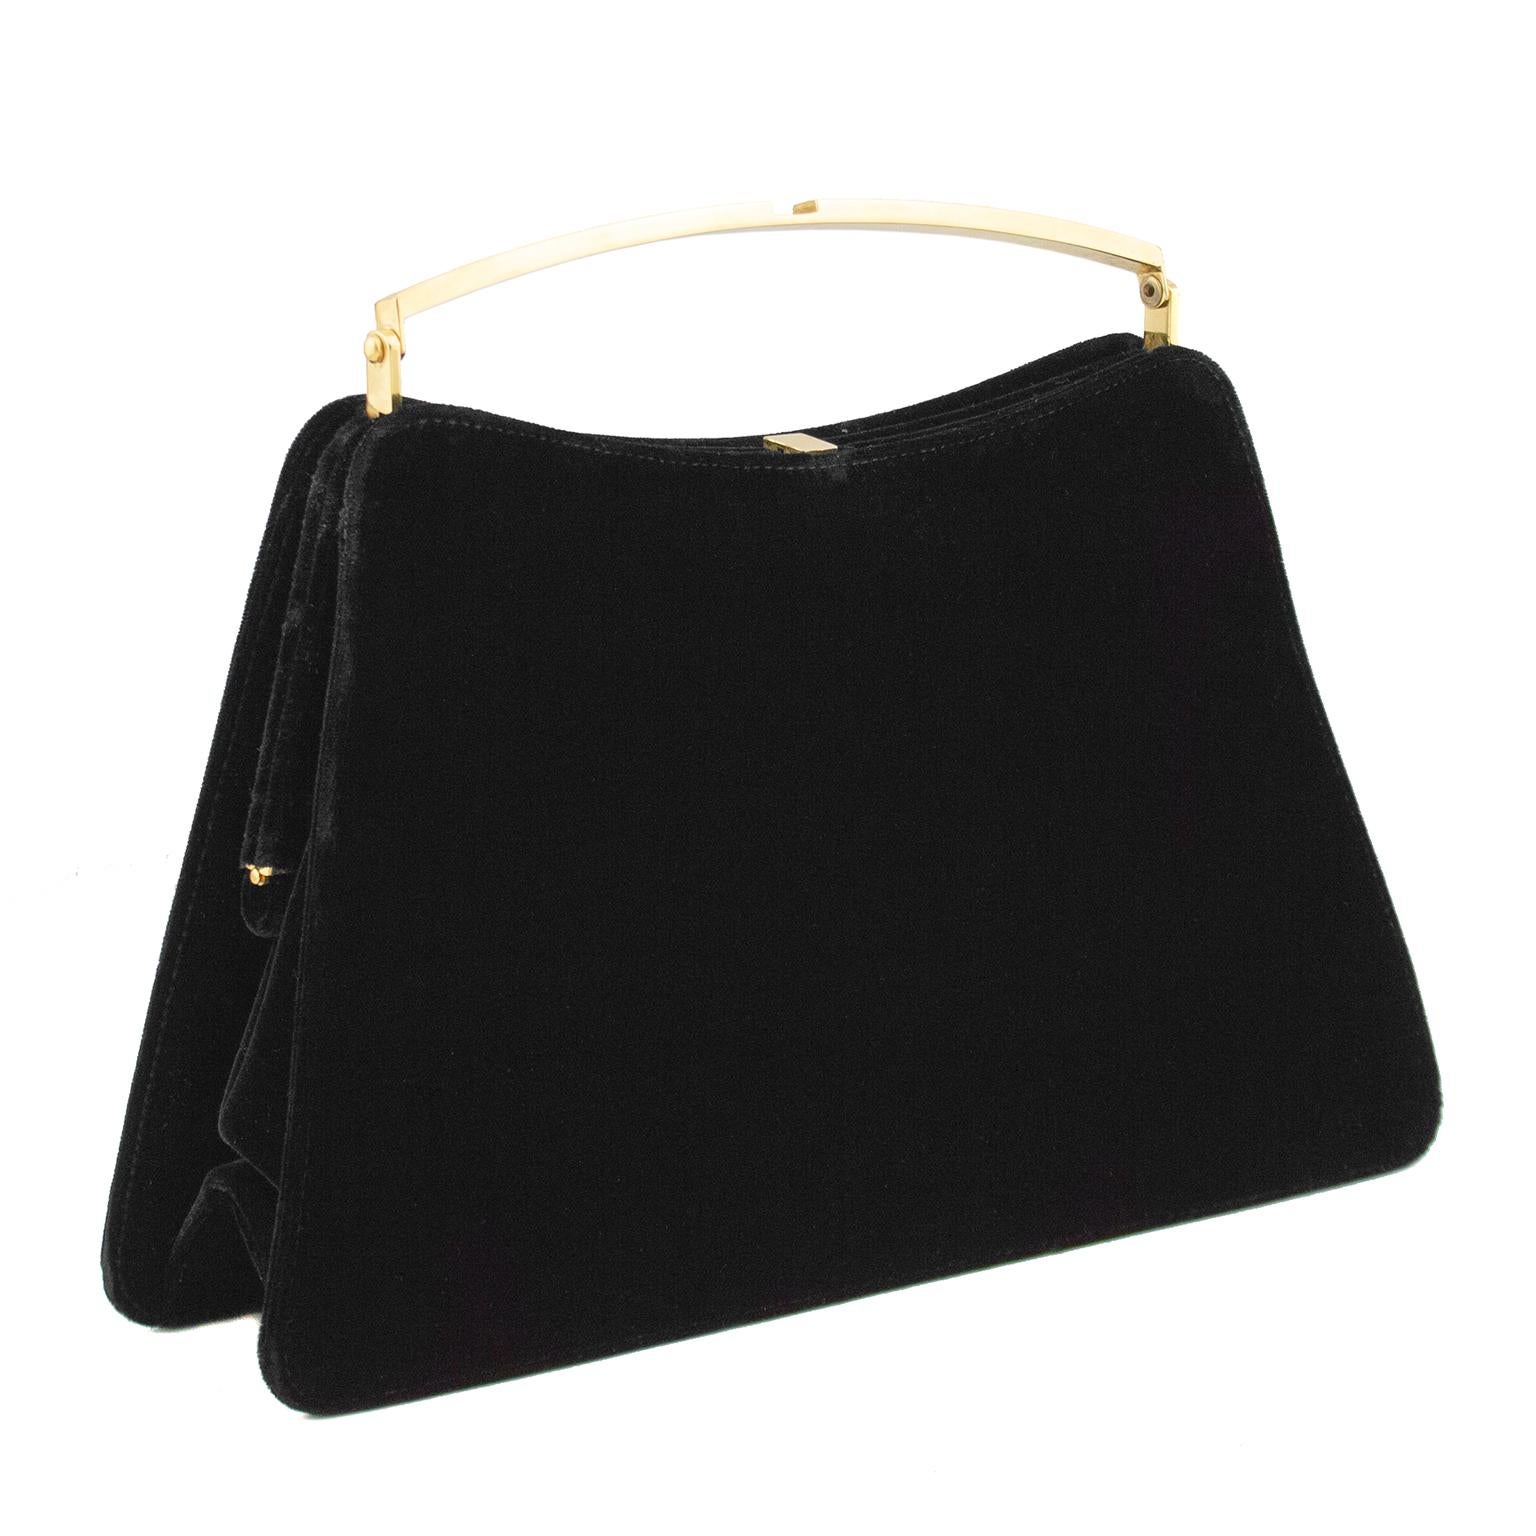 Beautiful 1960's jet black cut velvet hard frame dinner bag. Contrasting gold tone top handle and hardware. Black branded lining and interior slit pocket with zipper. Brand markings on all interior gold tone hardware. Great size for an